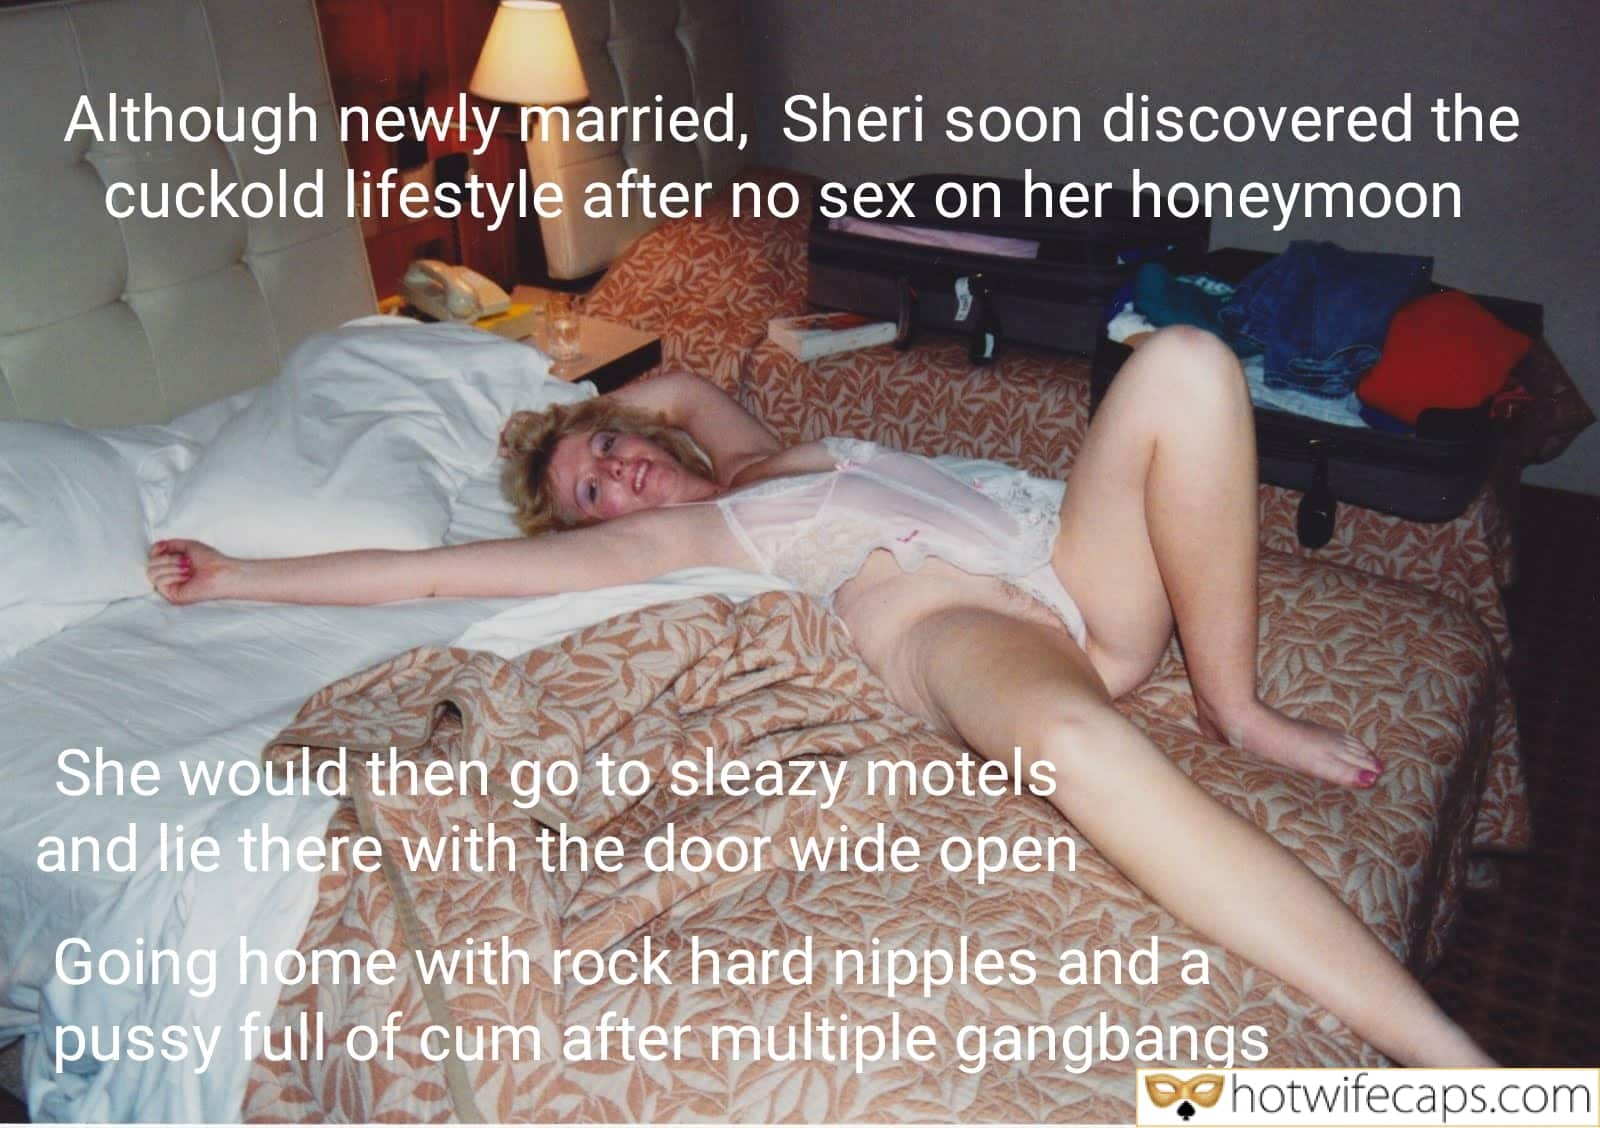 Humiliation Group Sex Getting Ready Cheating hotwife caption: Although newly married, Sheri soon discovered the cuckold lifestyle after no sex on her honeymoon She would then go to sleazy motels and lie there with the door wide open Going home with rock hard nipples and a pussy full...